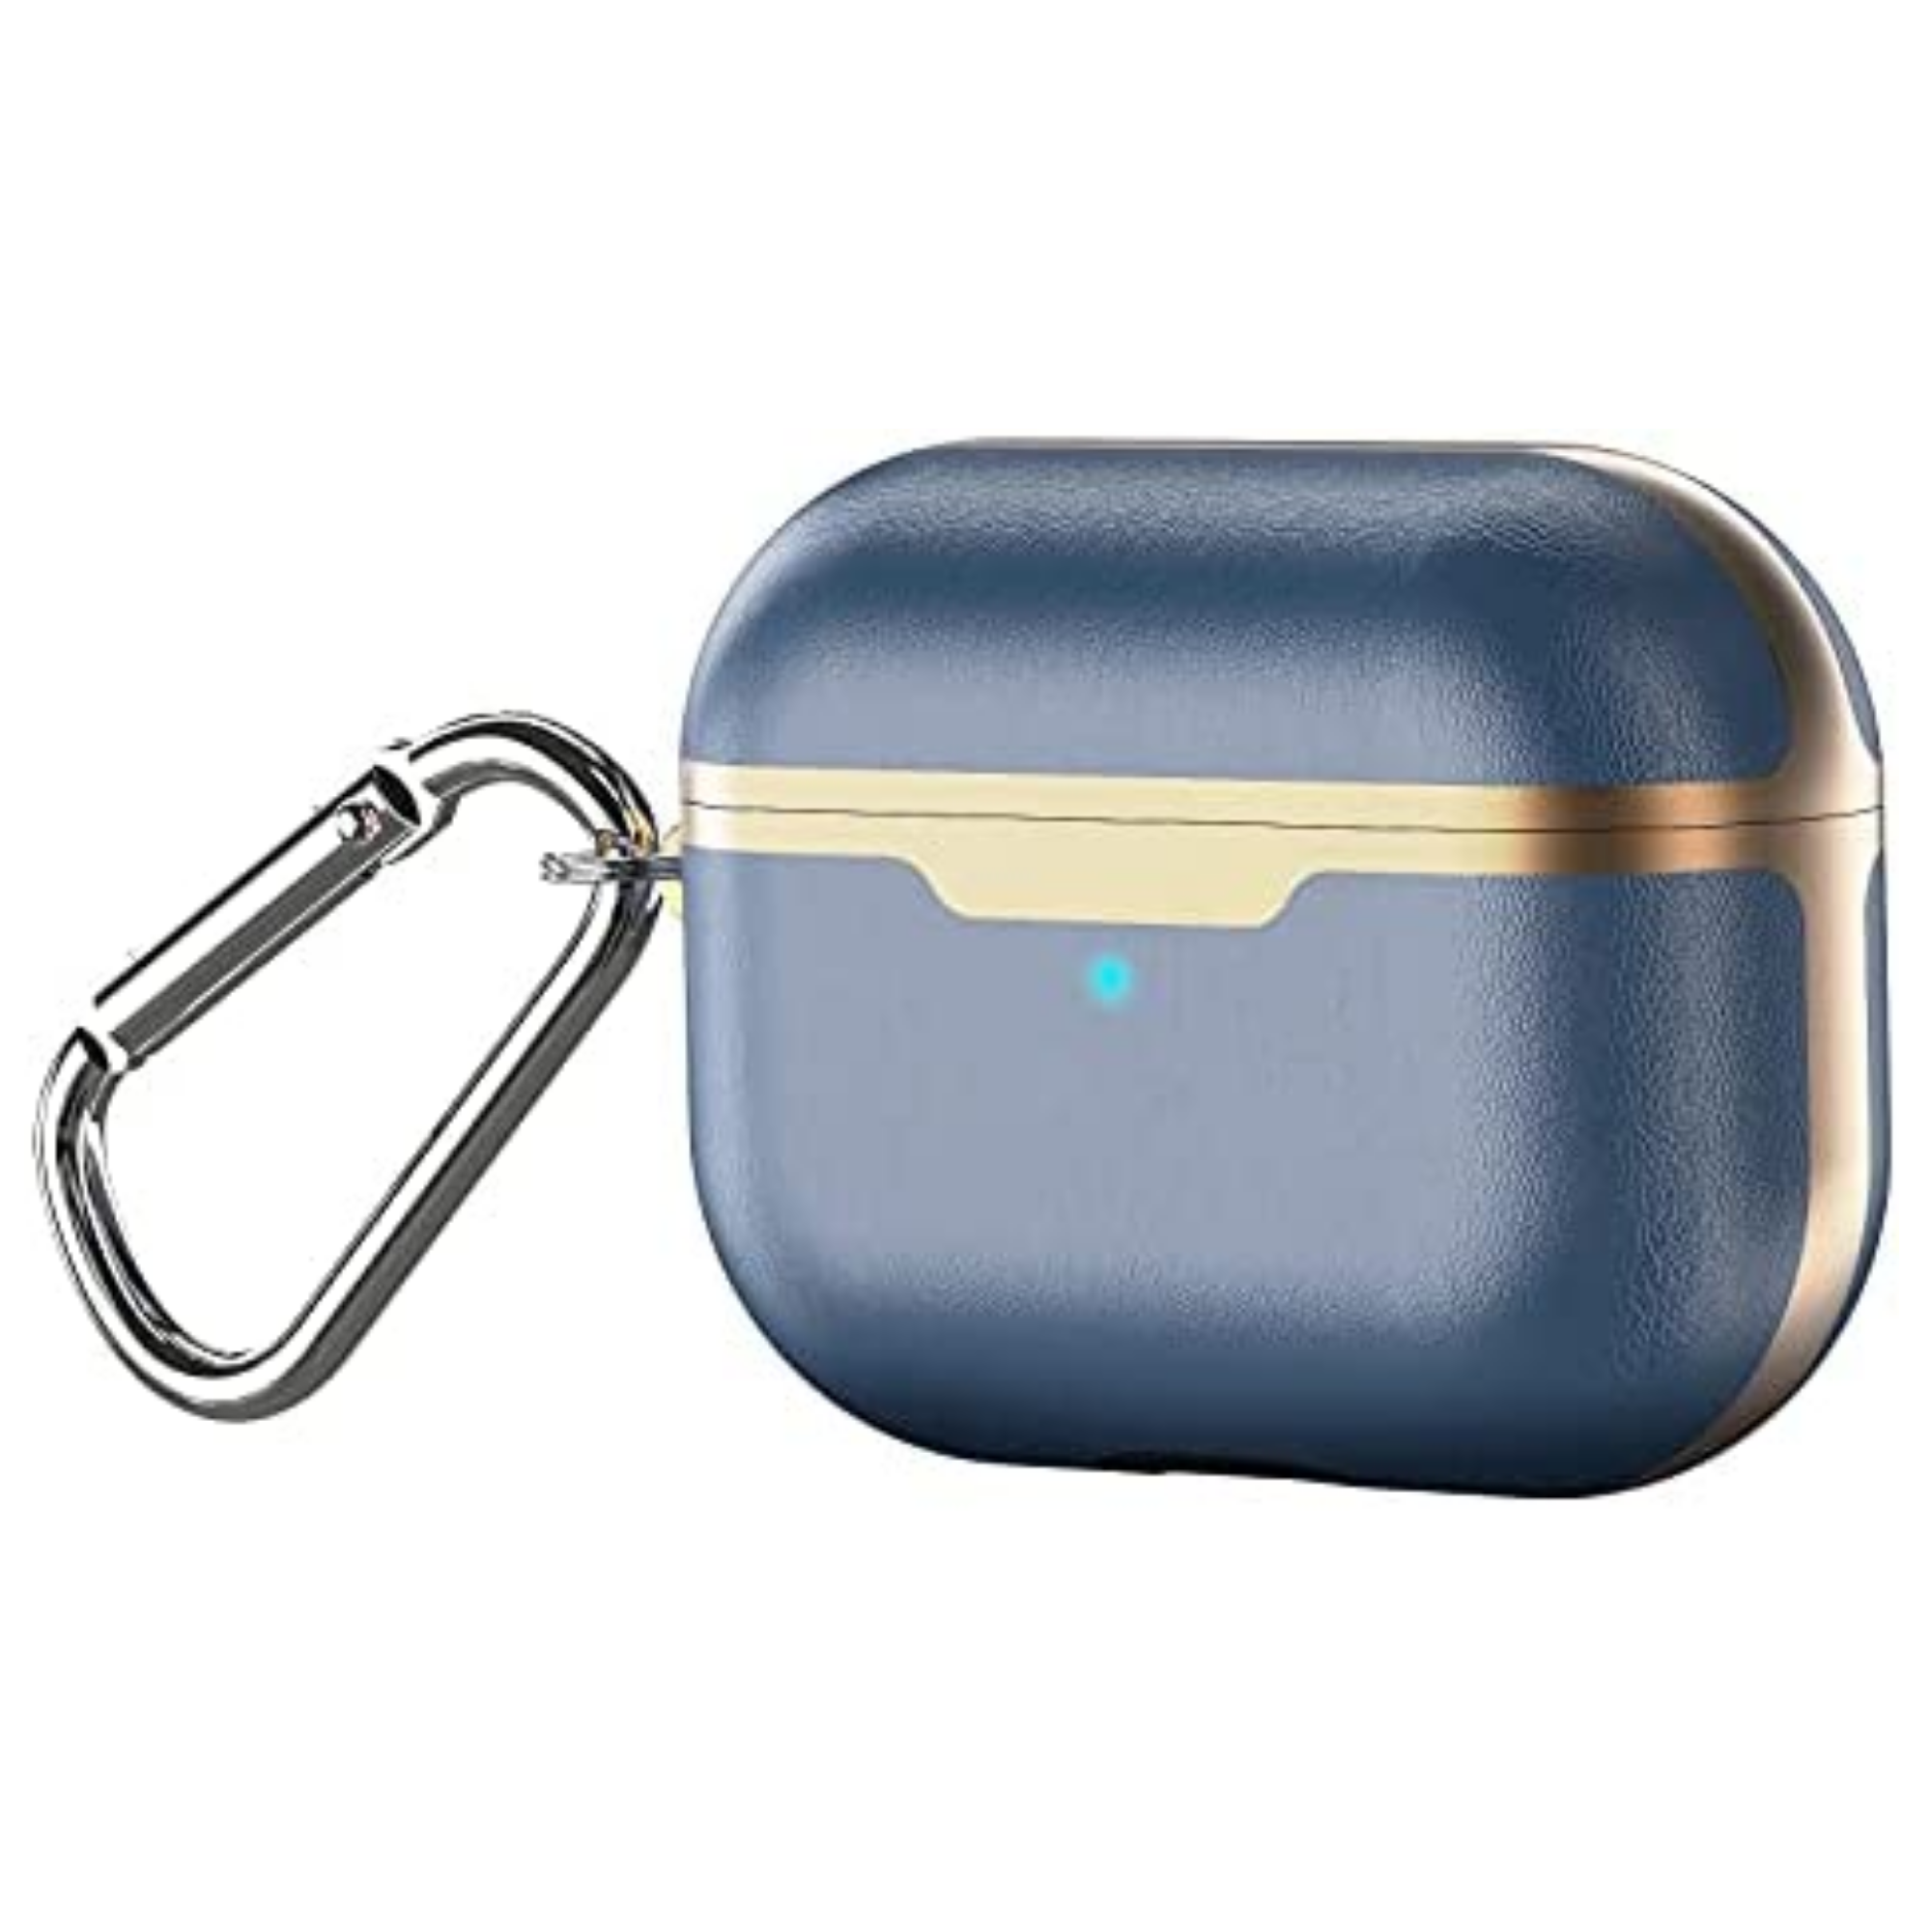 Apple Airpod Pro Case - Vegan Leather Gold Trim Design Protective Shockproof Faux Leather Cover With Clip Keychain - Supports Wireless Qi Charging for Airpods Pro Generation 1 - Indigo Blue